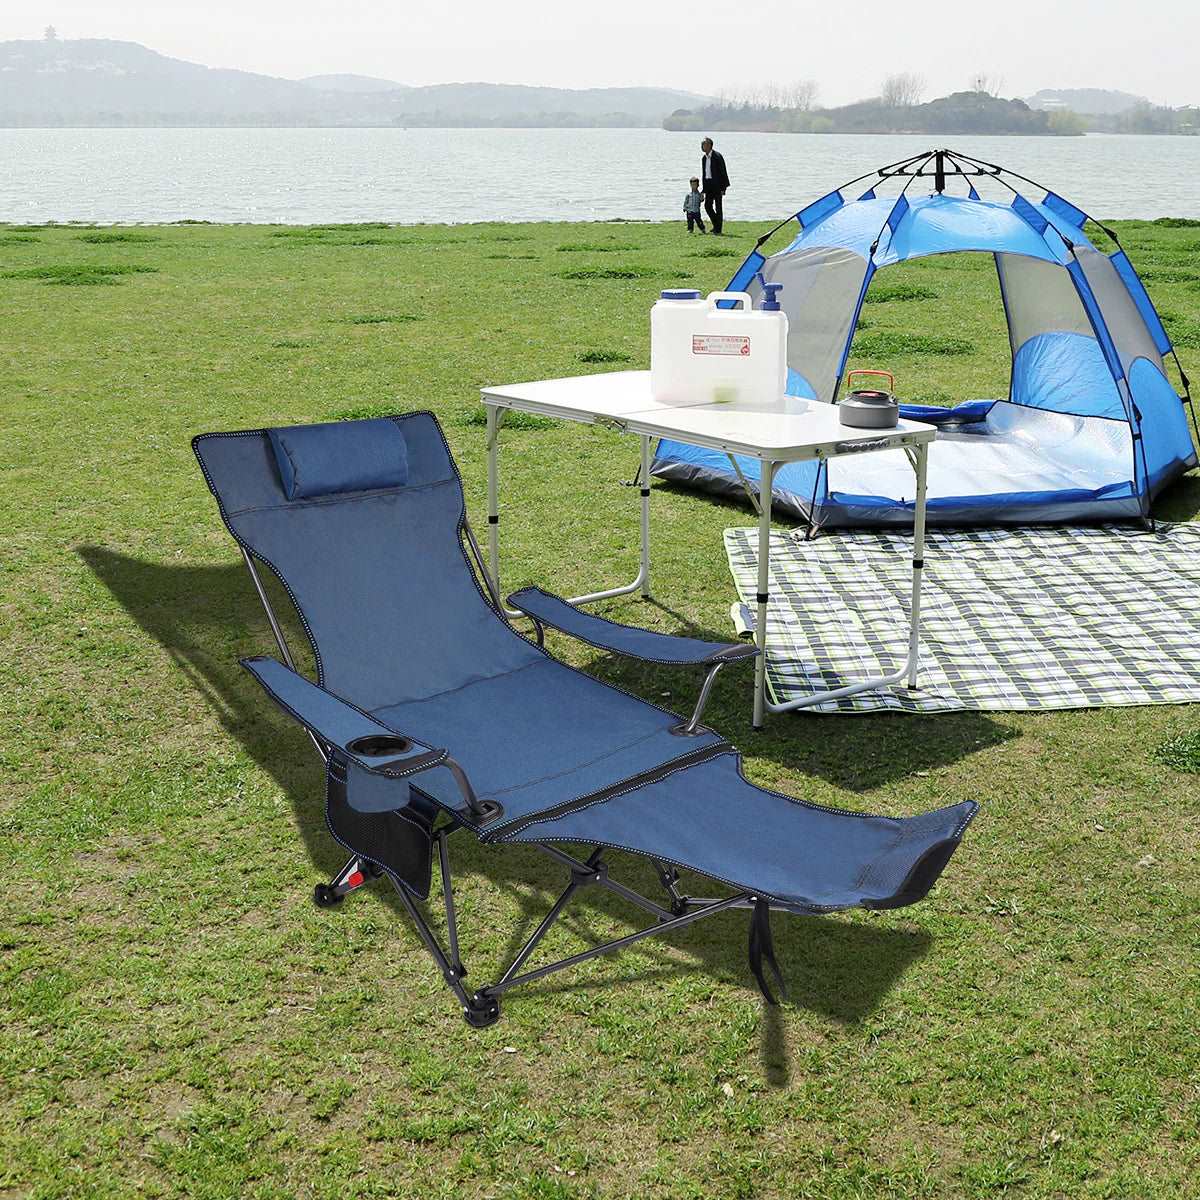 Camp in Comfort with Our Outdoor Furniture